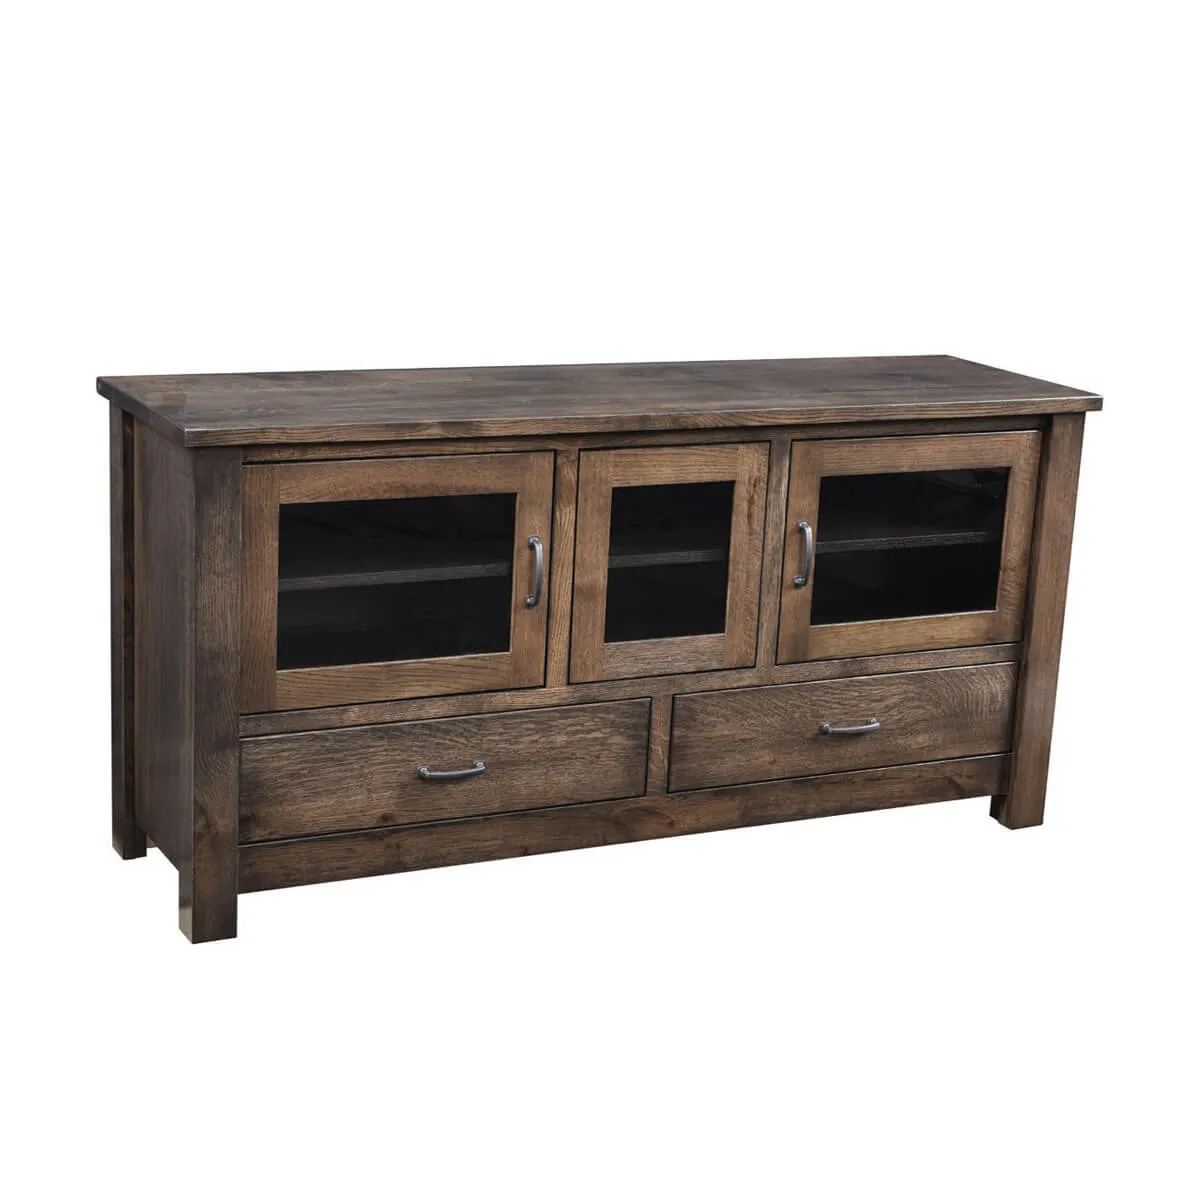 Terrance TV Stand